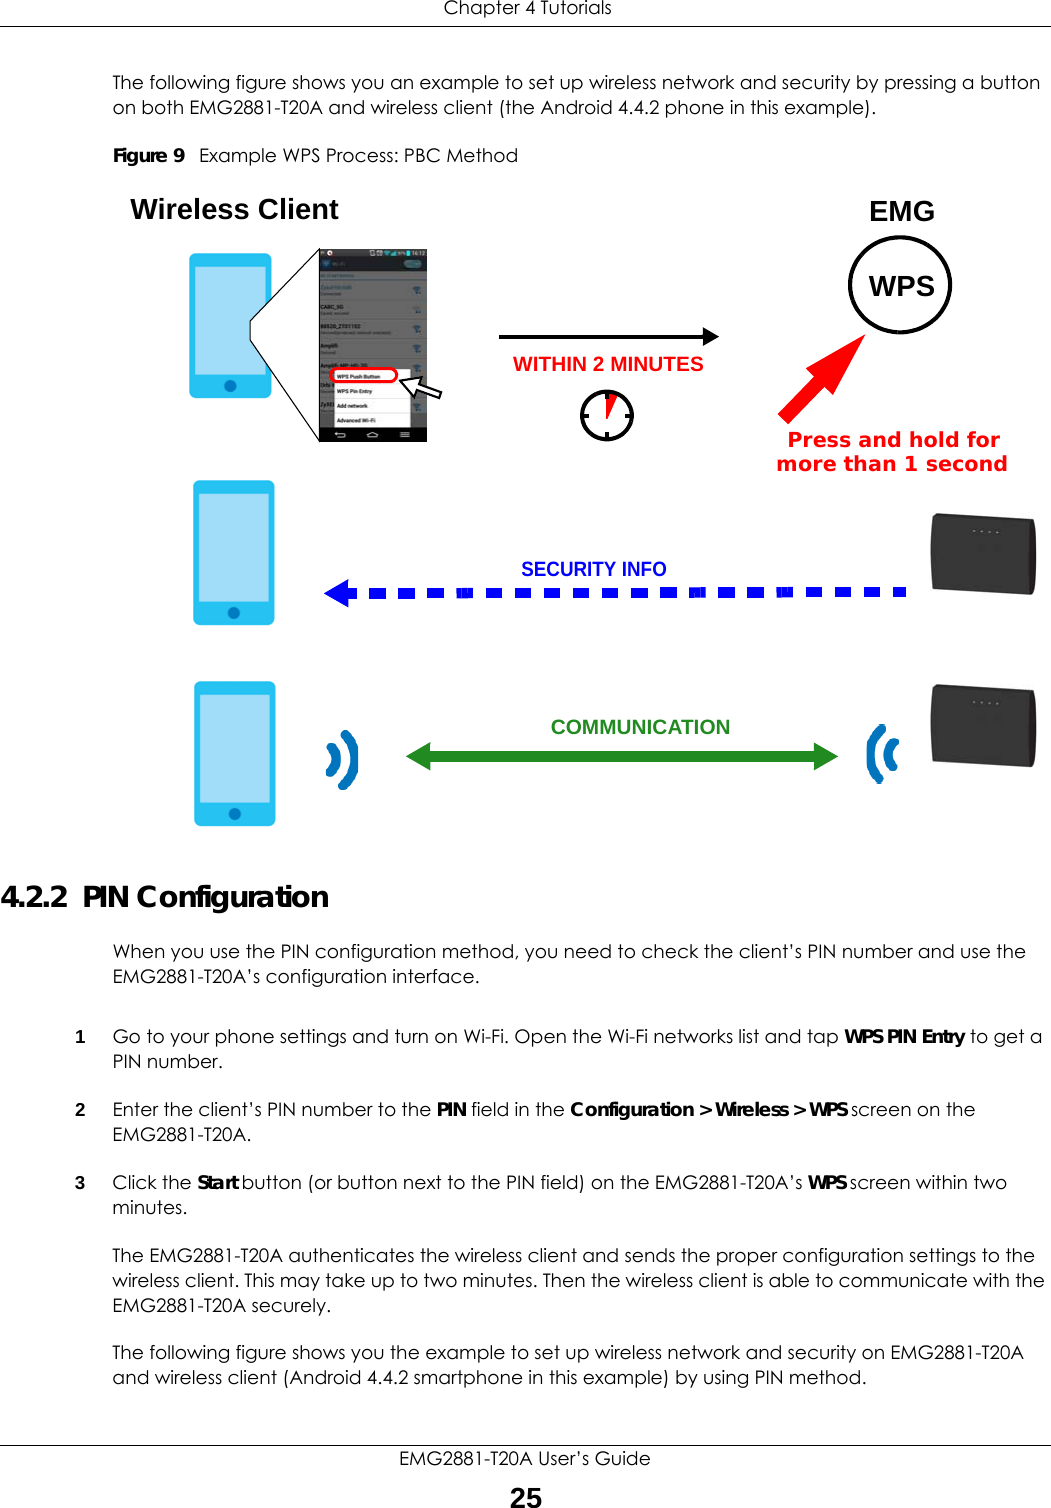  Chapter 4 TutorialsEMG2881-T20A User’s Guide25The following figure shows you an example to set up wireless network and security by pressing a button on both EMG2881-T20A and wireless client (the Android 4.4.2 phone in this example).Figure 9   Example WPS Process: PBC Method4.2.2  PIN ConfigurationWhen you use the PIN configuration method, you need to check the client’s PIN number and use the EMG2881-T20A’s configuration interface.1Go to your phone settings and turn on Wi-Fi. Open the Wi-Fi networks list and tap WPS PIN Entry to get a PIN number.2Enter the client’s PIN number to the PIN field in the Configuration &gt; Wireless &gt; WPS screen on the EMG2881-T20A.3Click the Start button (or button next to the PIN field) on the EMG2881-T20A’s WPS screen within two minutes.The EMG2881-T20A authenticates the wireless client and sends the proper configuration settings to the wireless client. This may take up to two minutes. Then the wireless client is able to communicate with the EMG2881-T20A securely. The following figure shows you the example to set up wireless network and security on EMG2881-T20A and wireless client (Android 4.4.2 smartphone in this example) by using PIN method. Wireless ClientSECURITY INFOCOMMUNICATIONWITHIN 2 MINUTESEMGWPSPress and hold for  more than 1 second